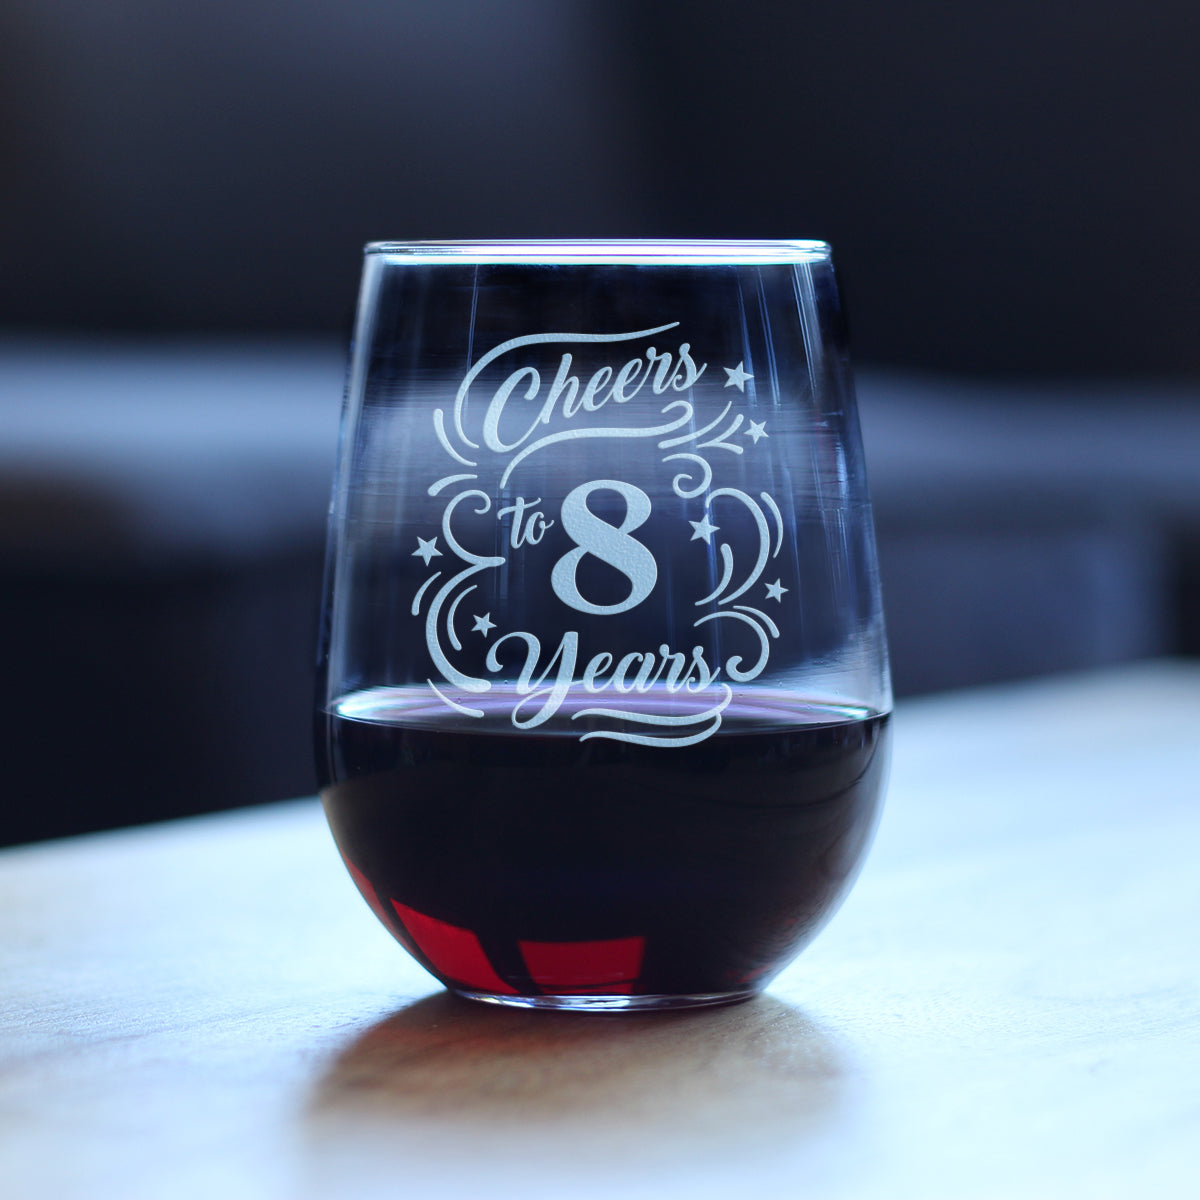 Cheers to 8 Years - Stemless Wine Glass Gifts for Women &amp; Men - 8th Anniversary Party Decor - Large 17 Oz Glasses